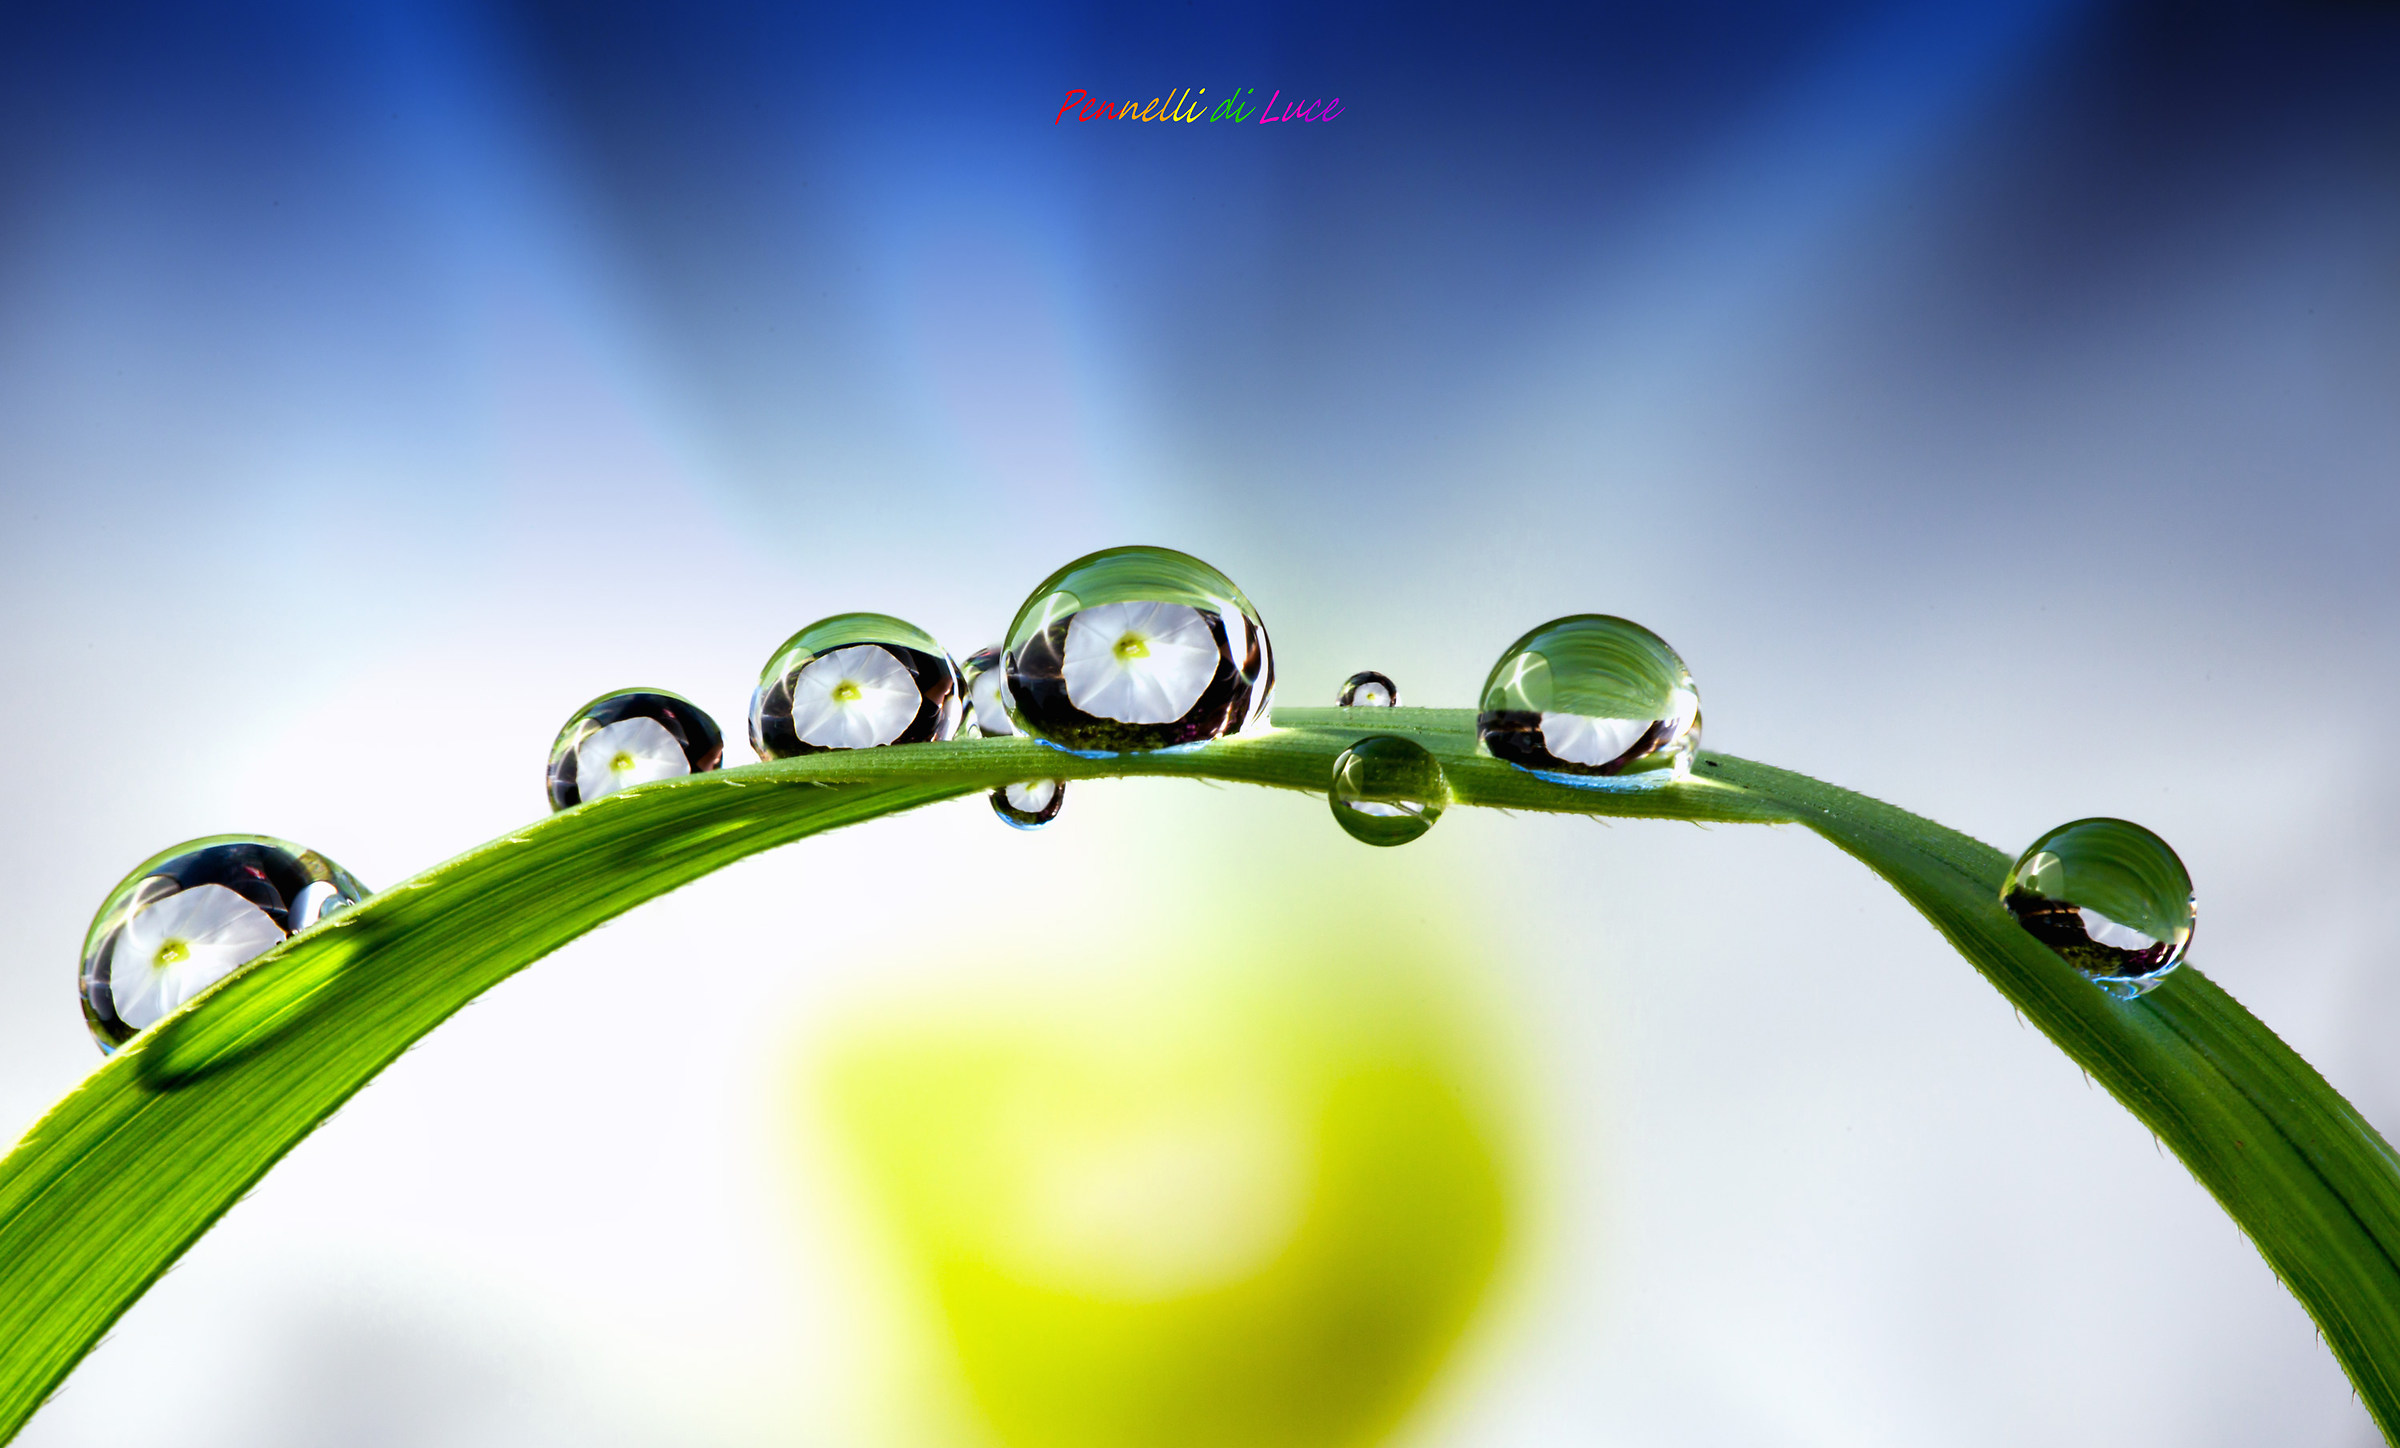 ... Droplets of dew ......